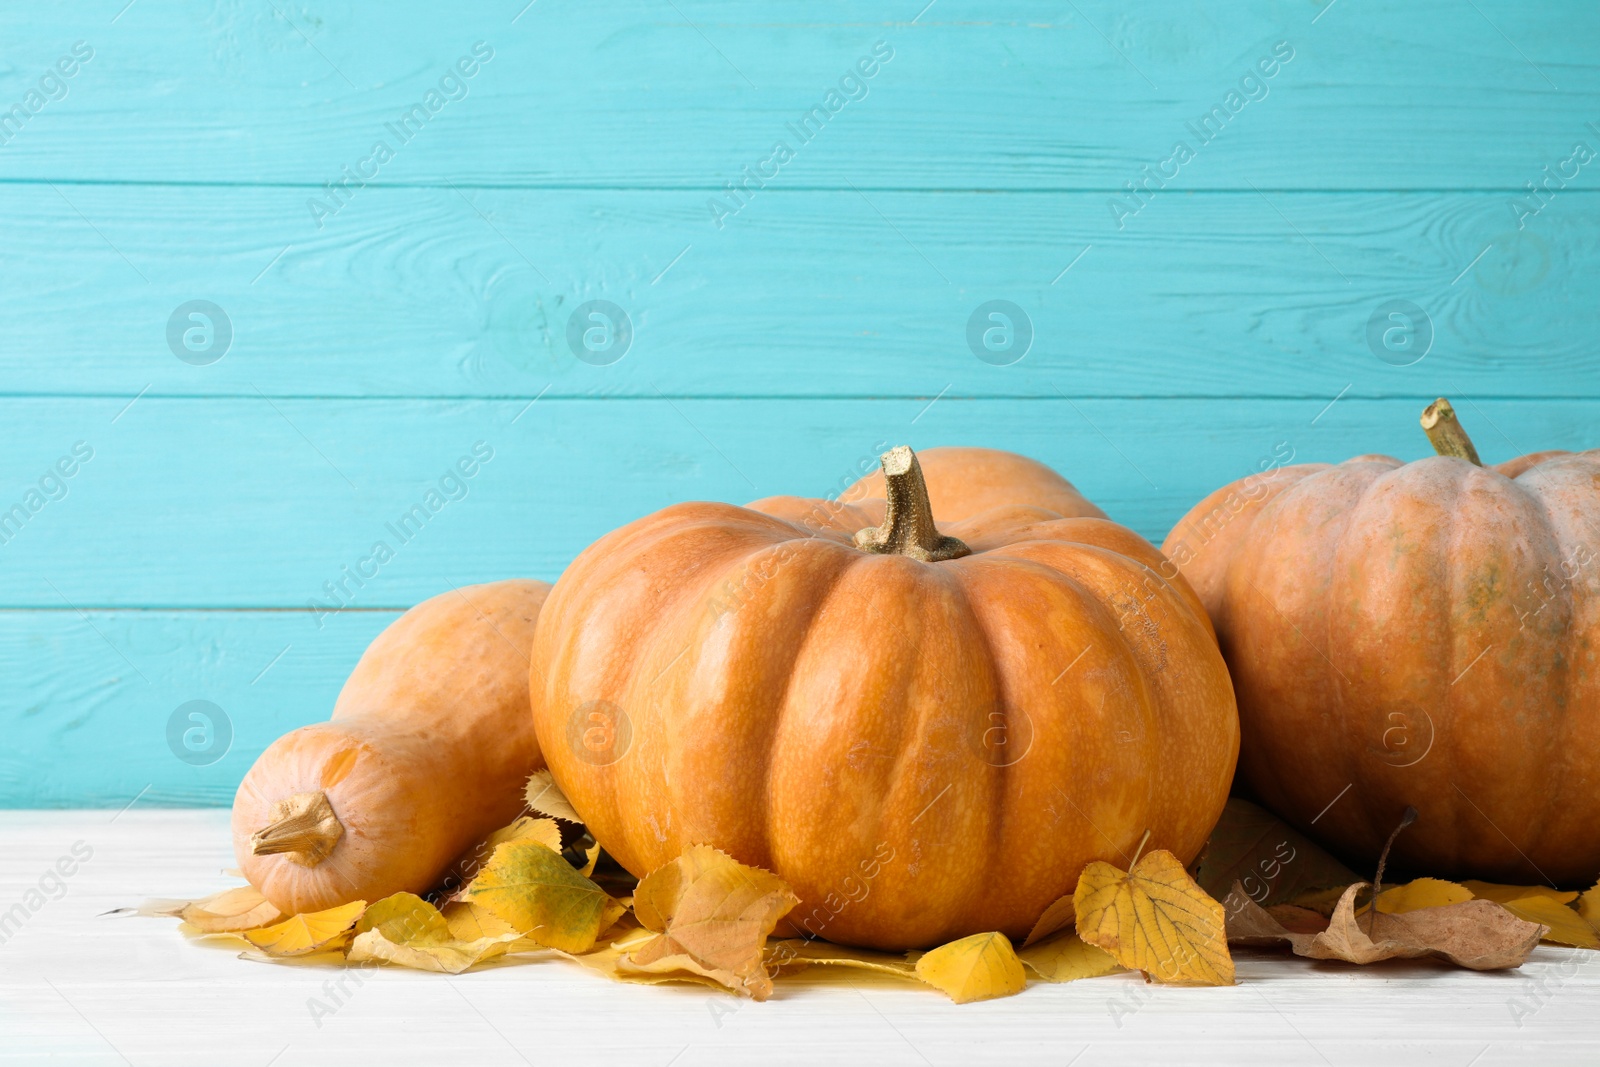 Photo of Ripe pumpkins on table against blue wooden background. Holiday decoration